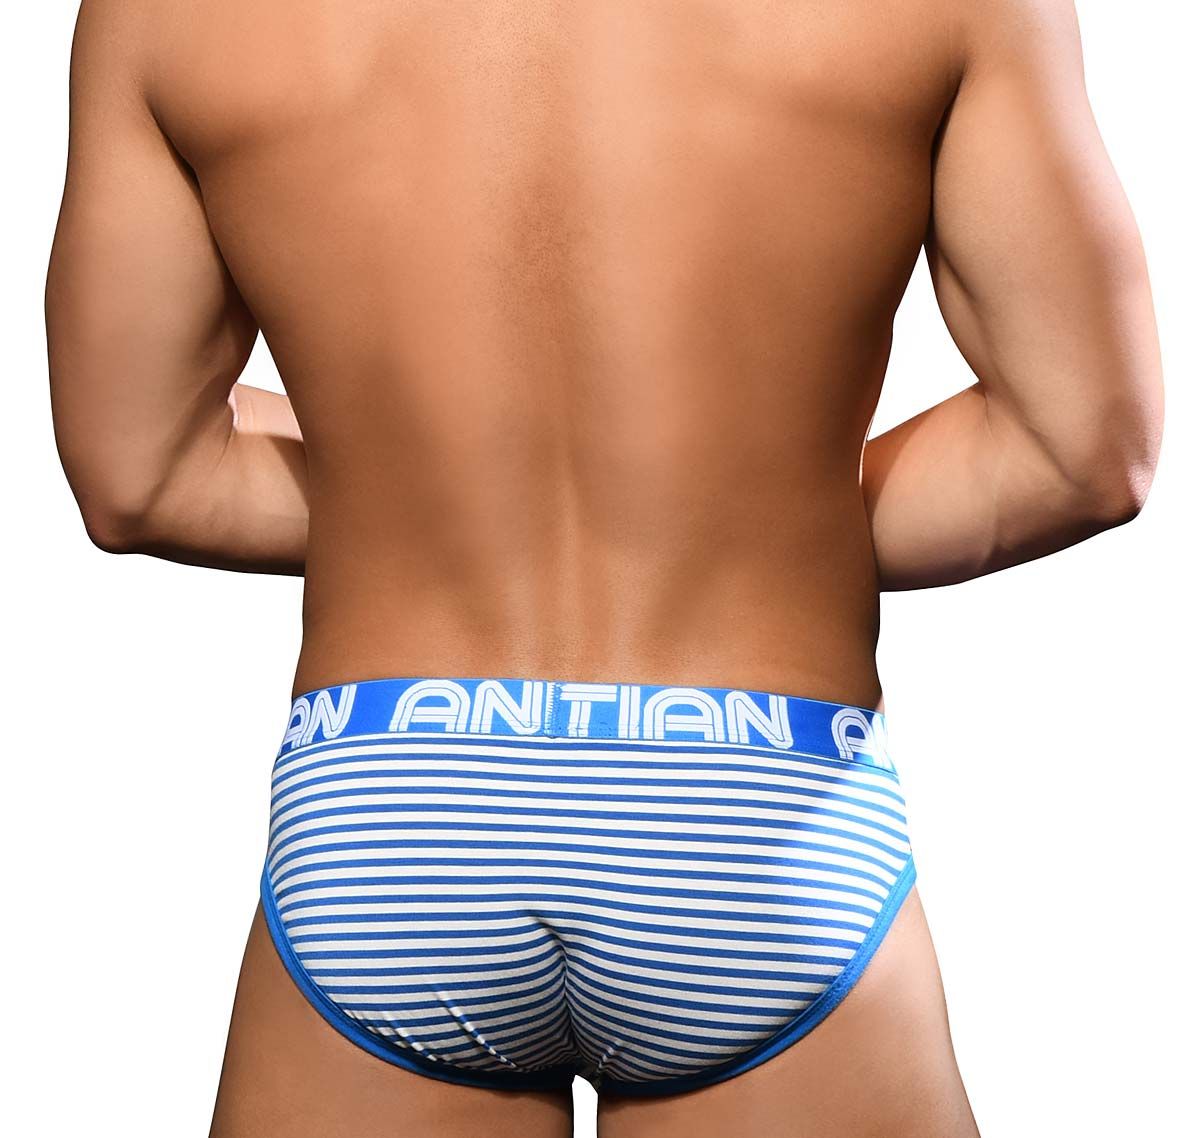 Andrew Christian Slip FLY BRIEF w/ ALMOST NAKED 92738, blu/bianco